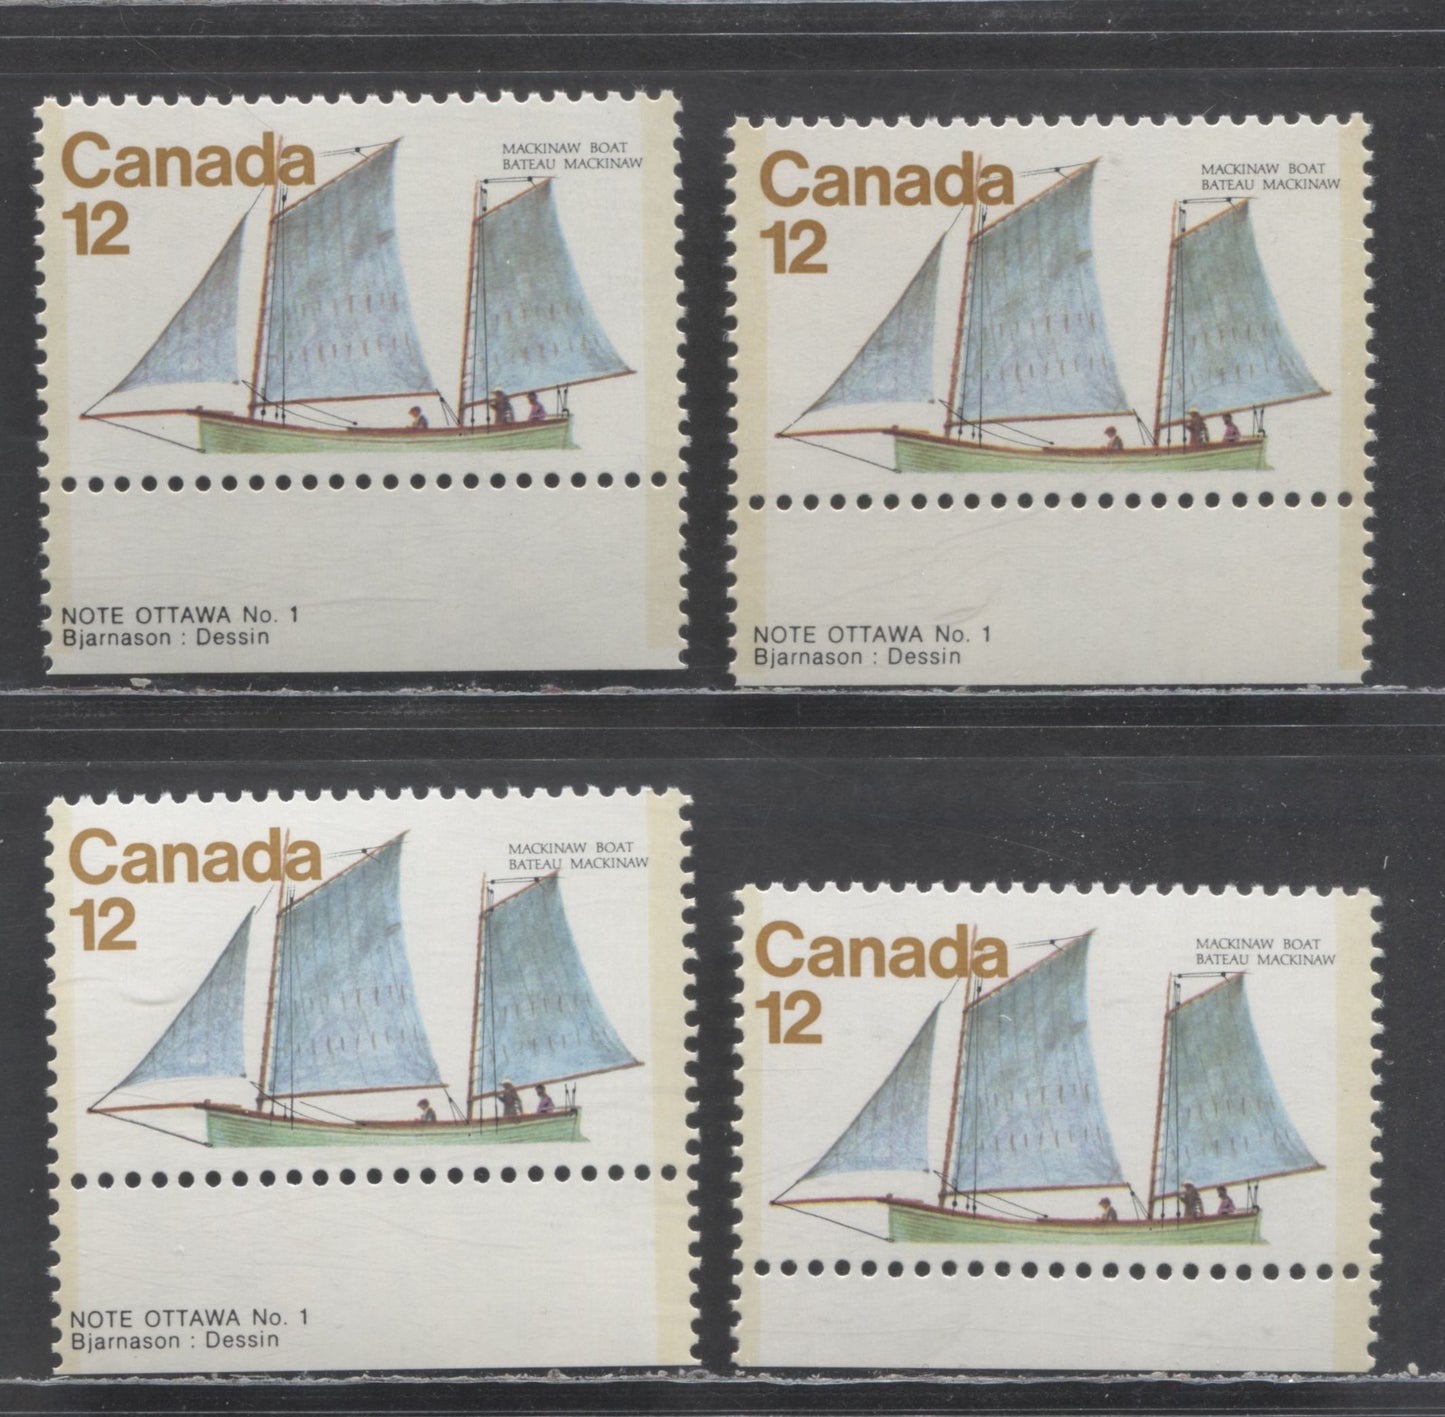 Lot 464 Canada #747i 12c Multicolored Mackinaw Boat, 1977 Sailing Vessels Issue, 4 VFNH Singles Showing 3 Pulleys From Pos. 47 On DF/LF, DF/DF & DF/NH Papers